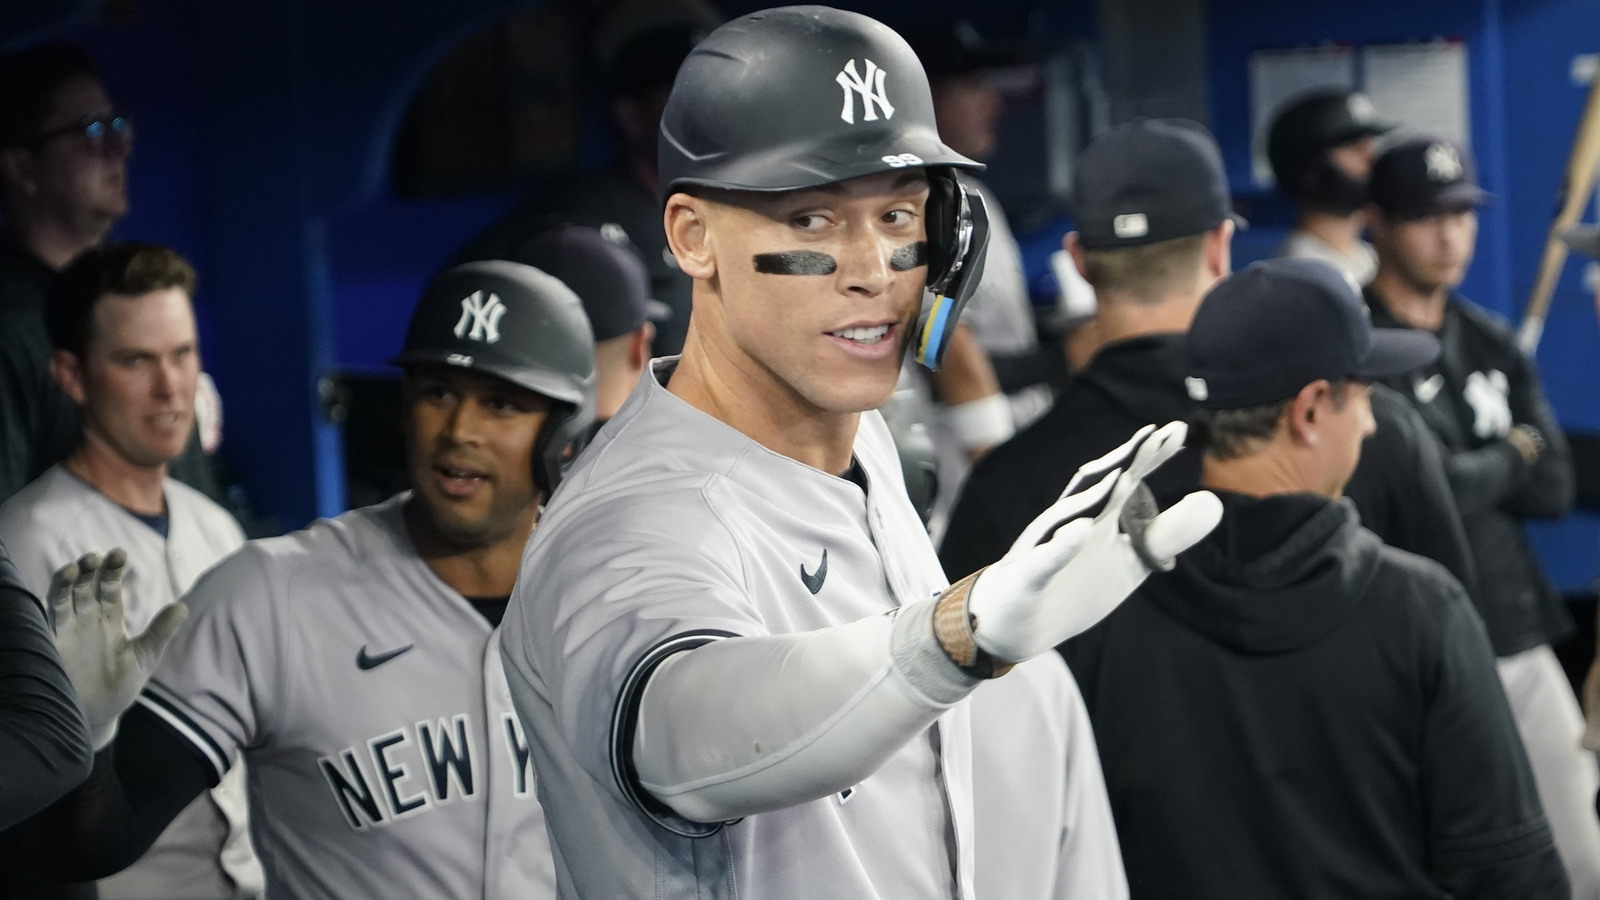 Boone's brother: Aaron Judge glances 'not a good look